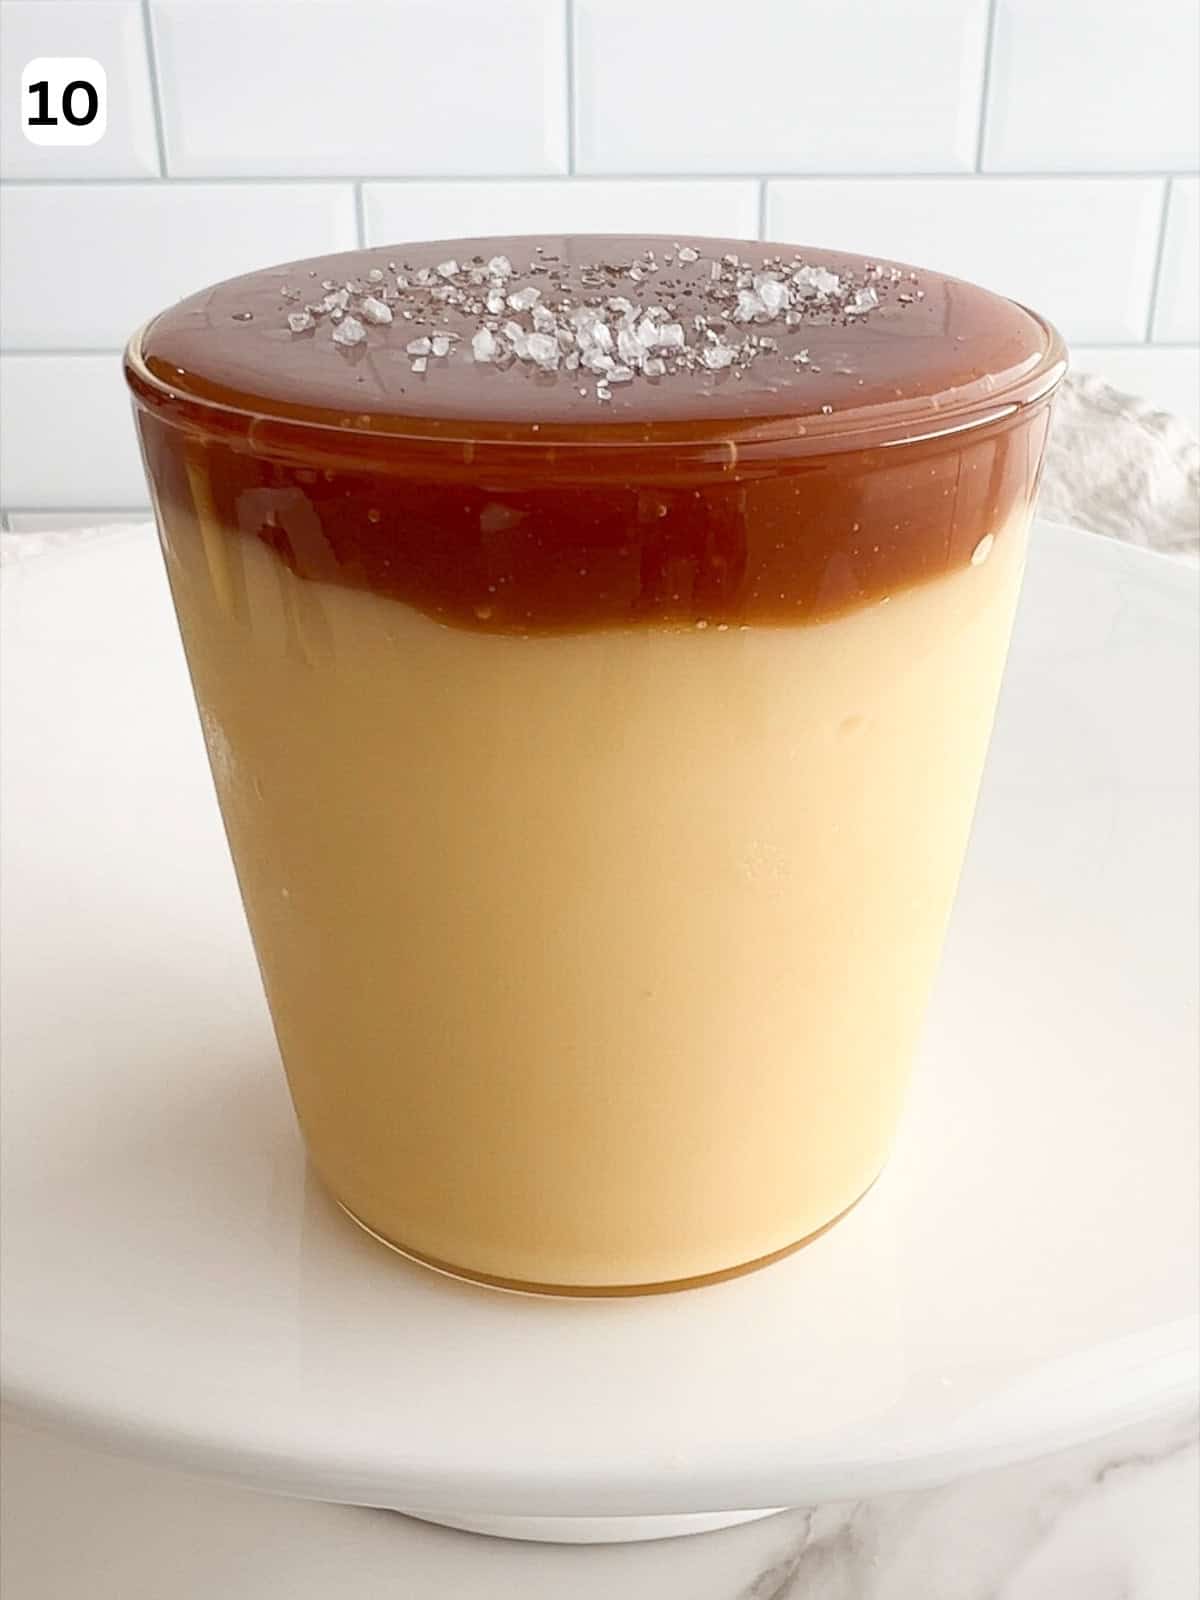 The budino is garnished with salted caramel sauce and sea salt.